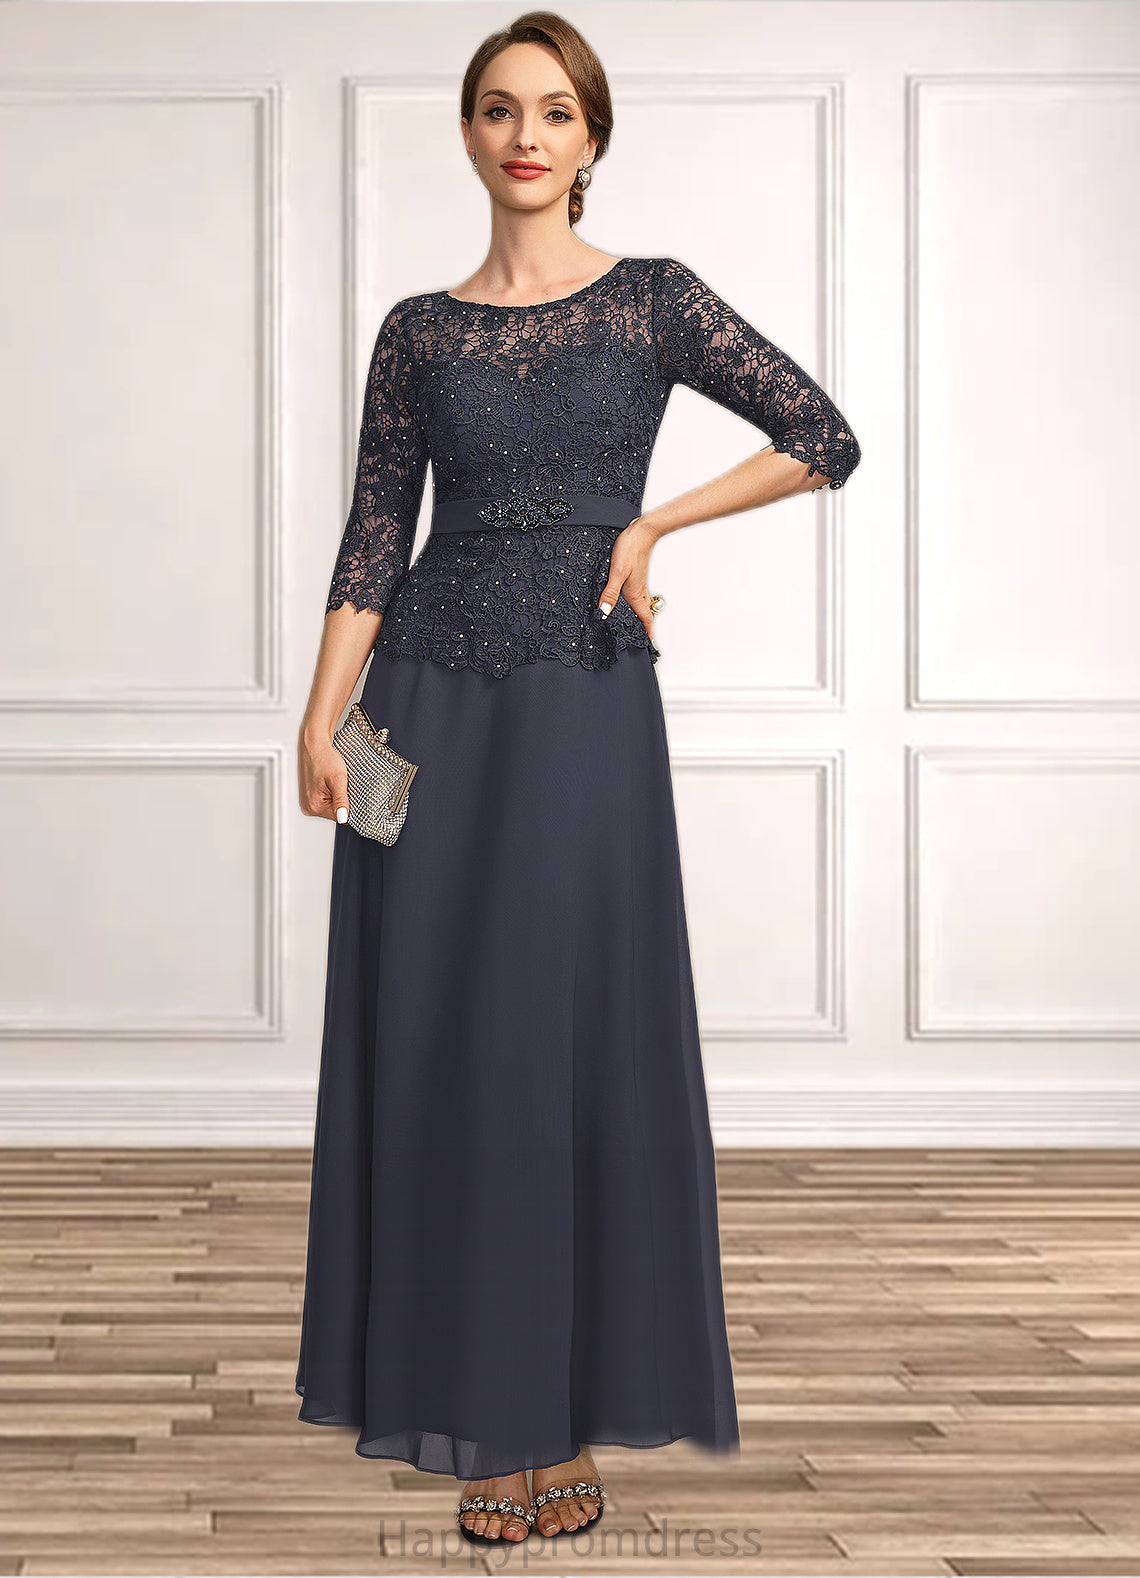 Shirley A-line Scoop Illusion Ankle-Length Chiffon Lace Mother of the Bride Dress With Beading Rhinestone XXSP0021659